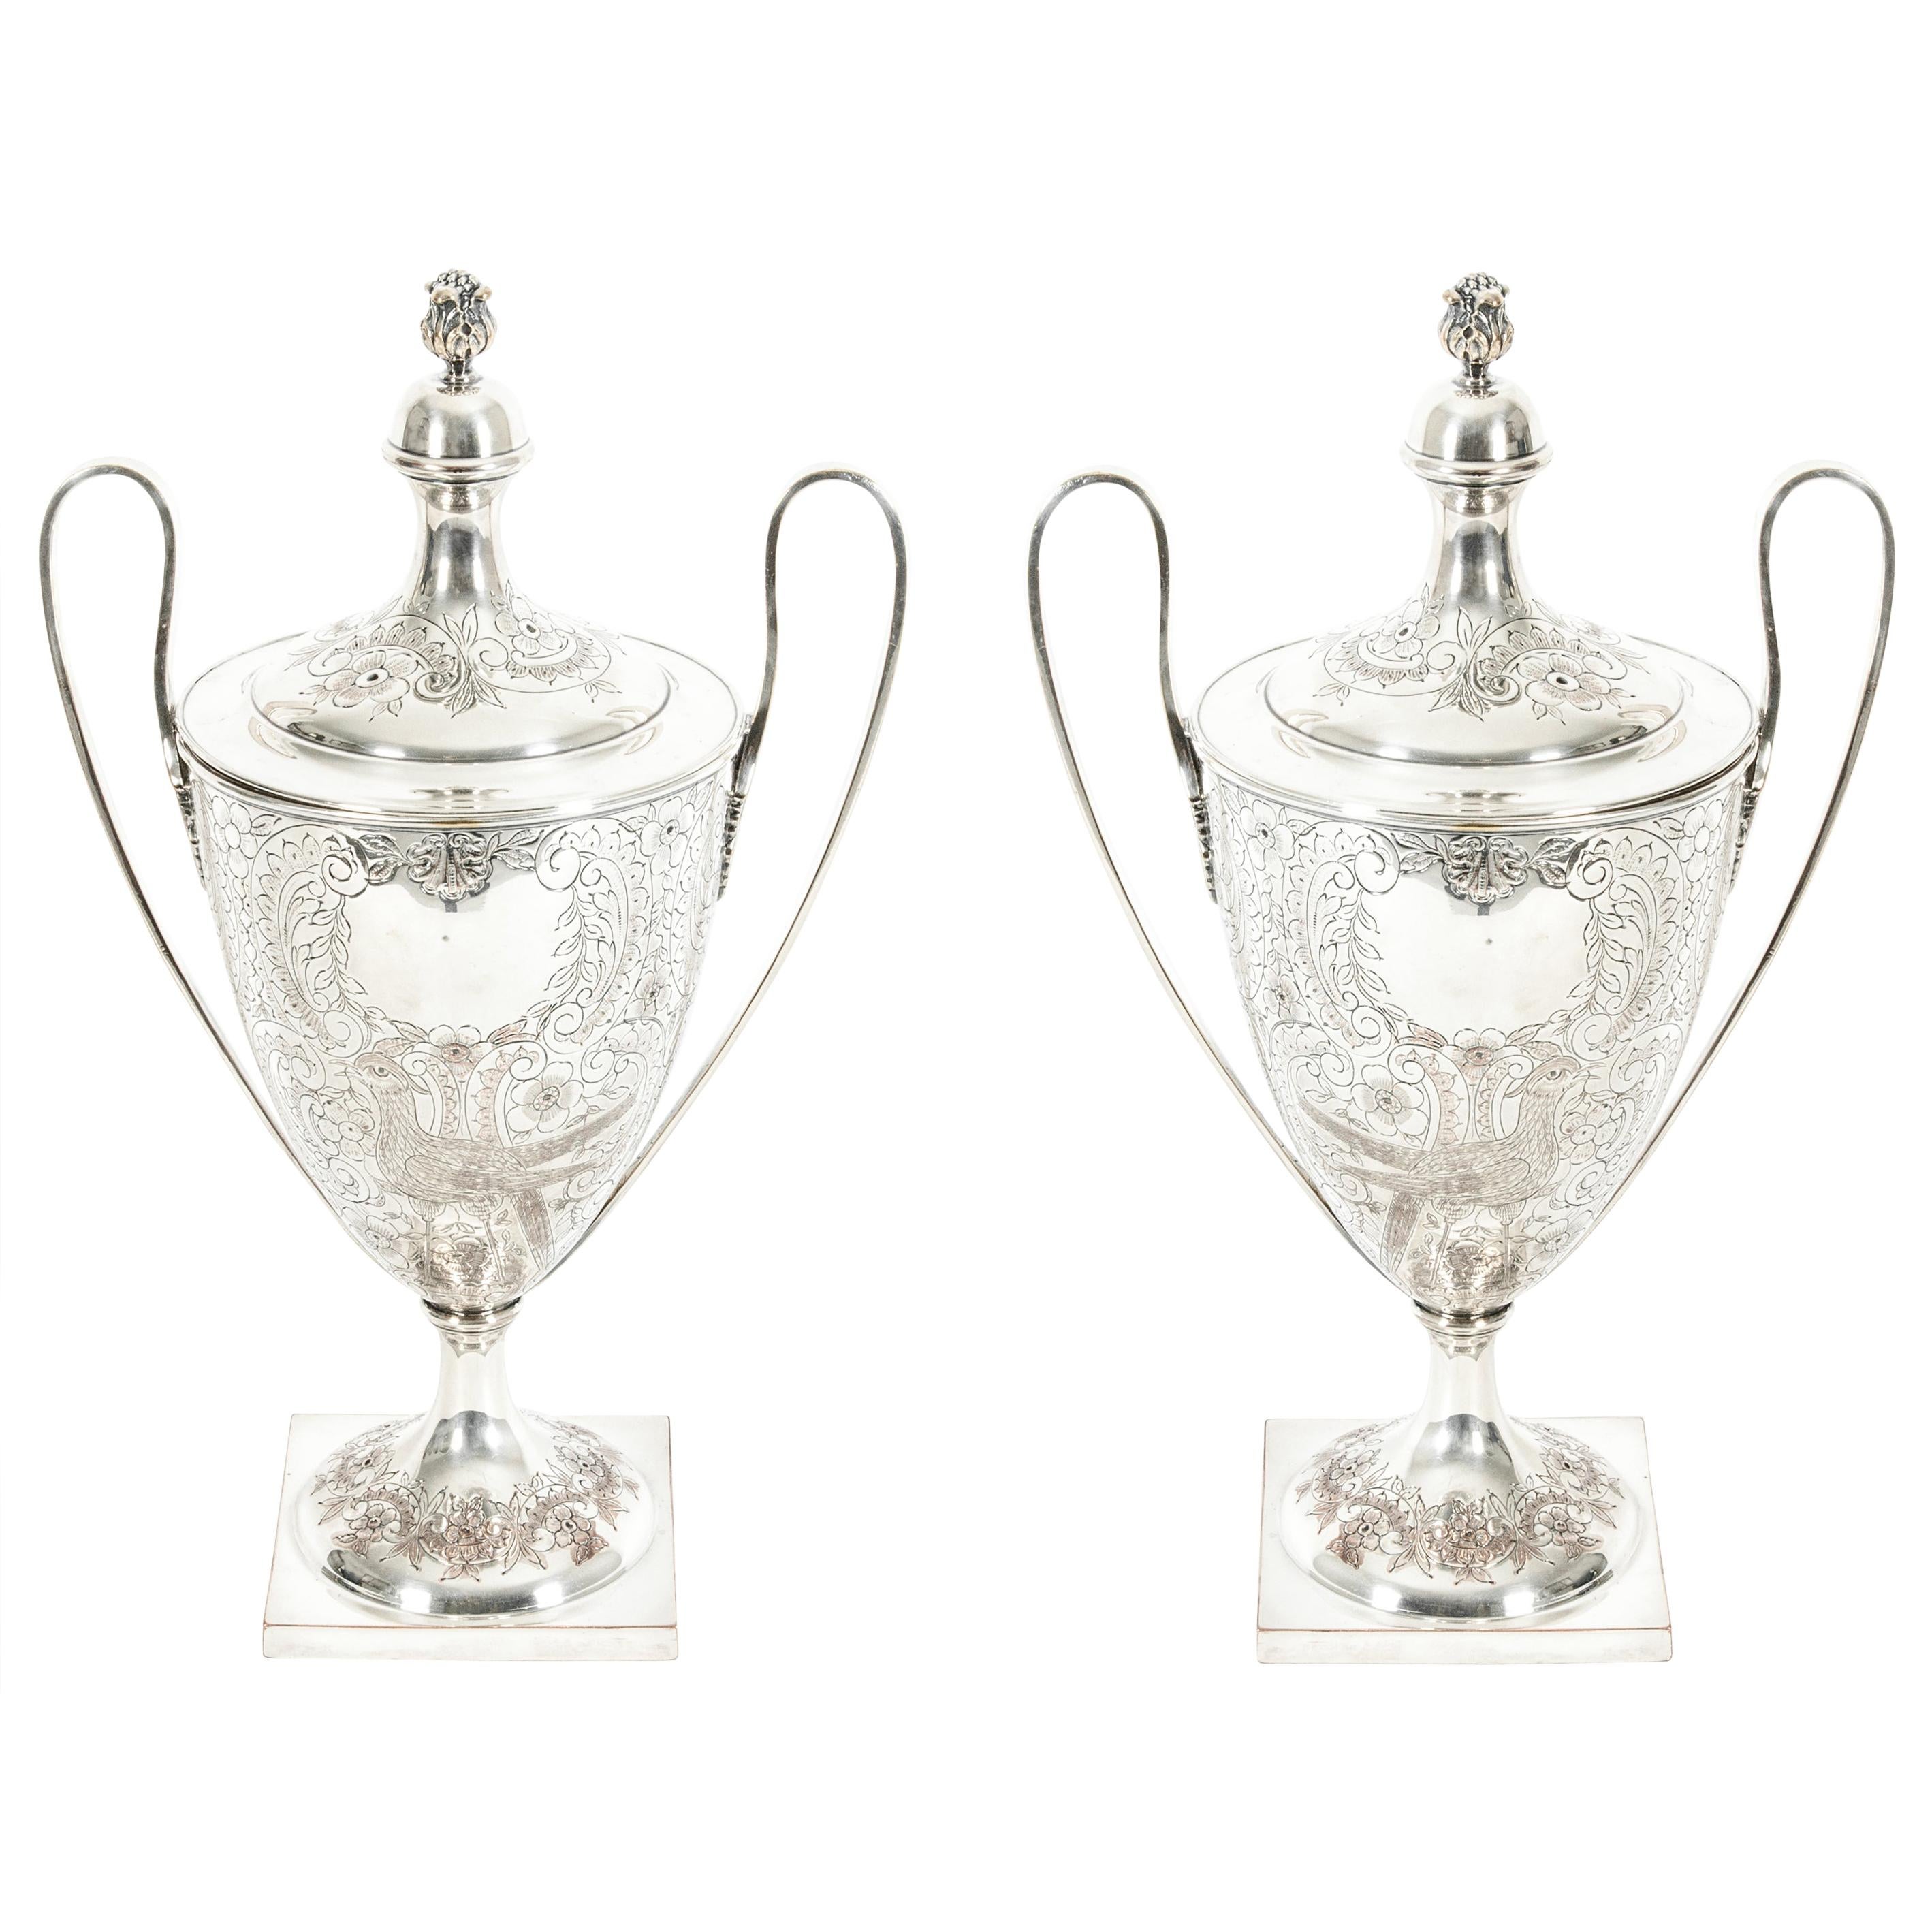 Pair Old English Plated Trophy Cup / Covered Urns